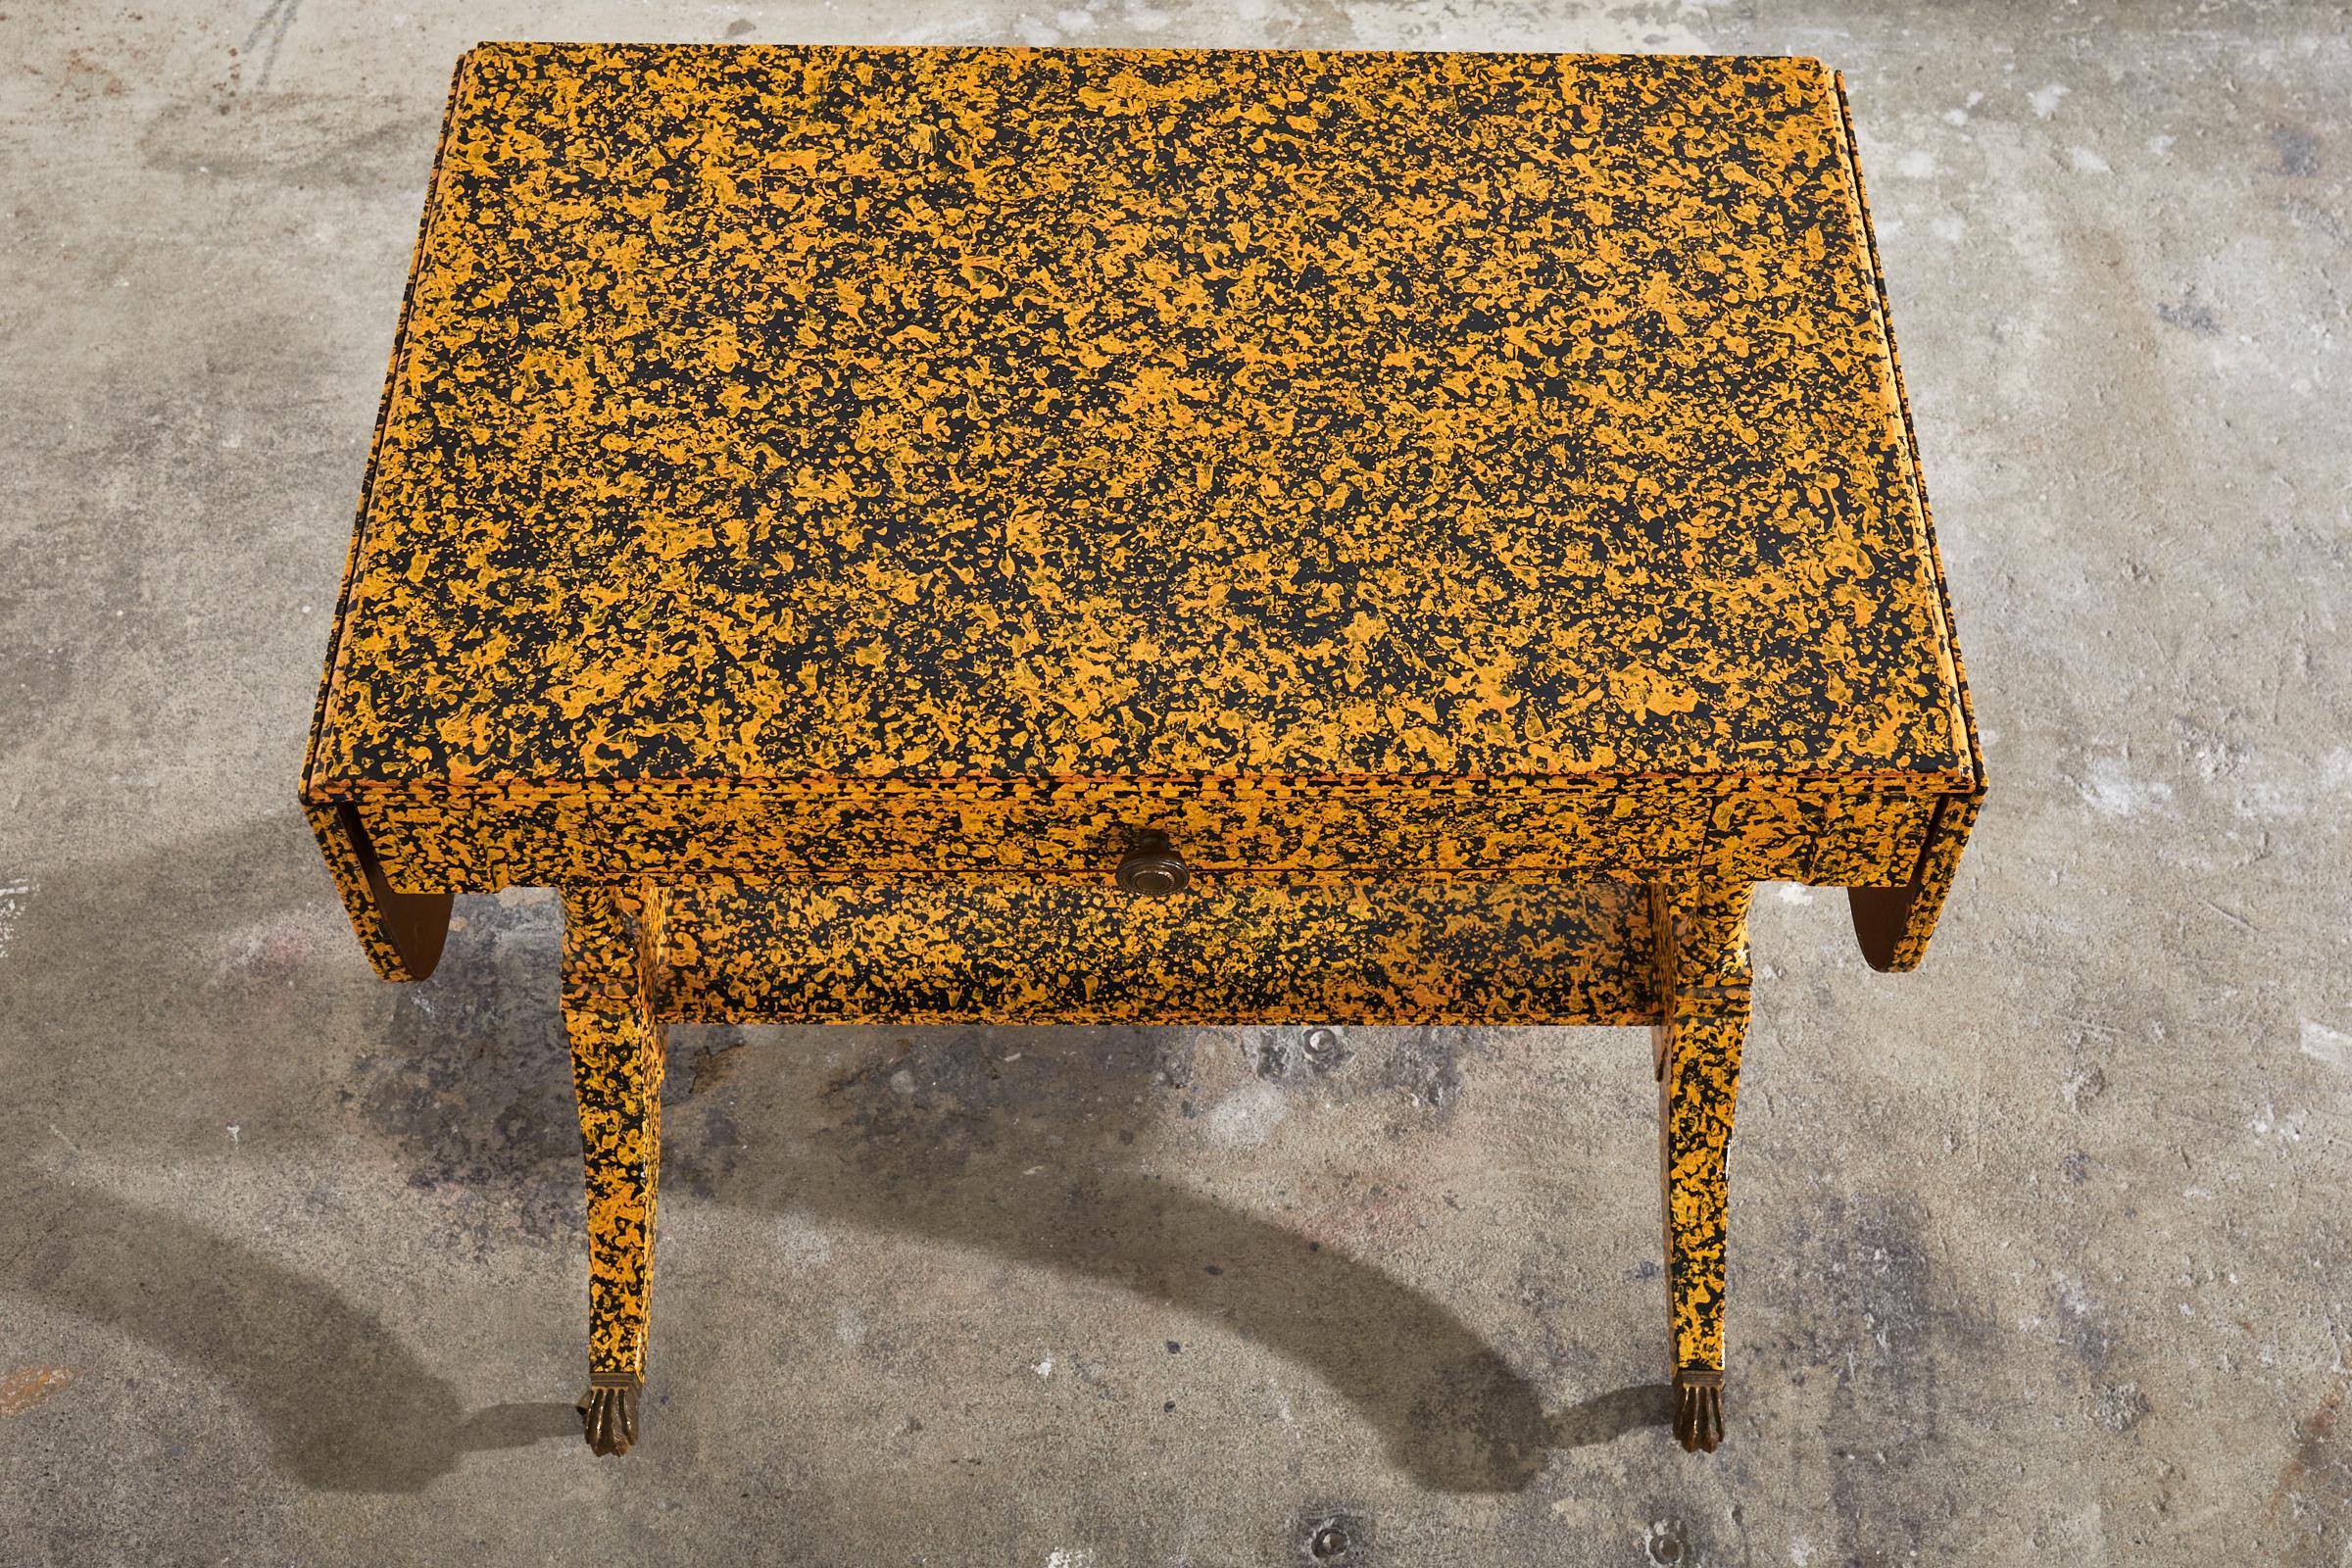 Brass 19th Century English Regency Style Writing Table Speckled by Ira Yeager For Sale